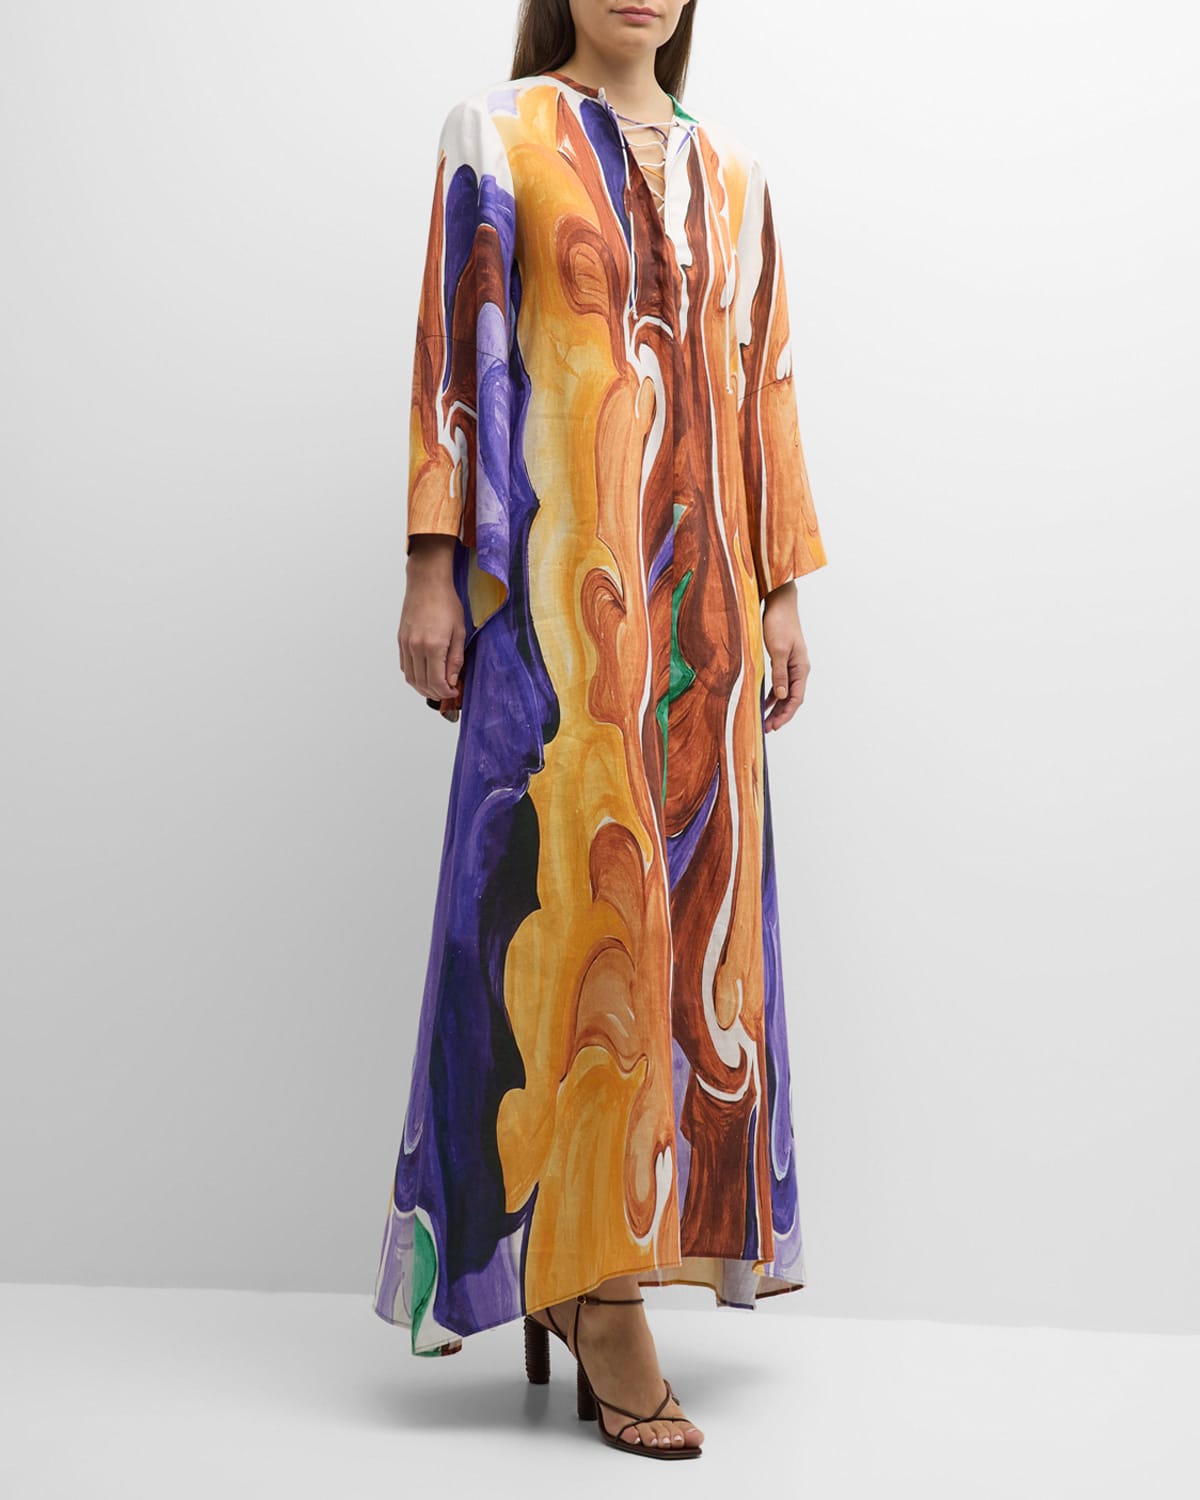 Rainbow Flames Printed Lace-Up Linen Maxi Dress